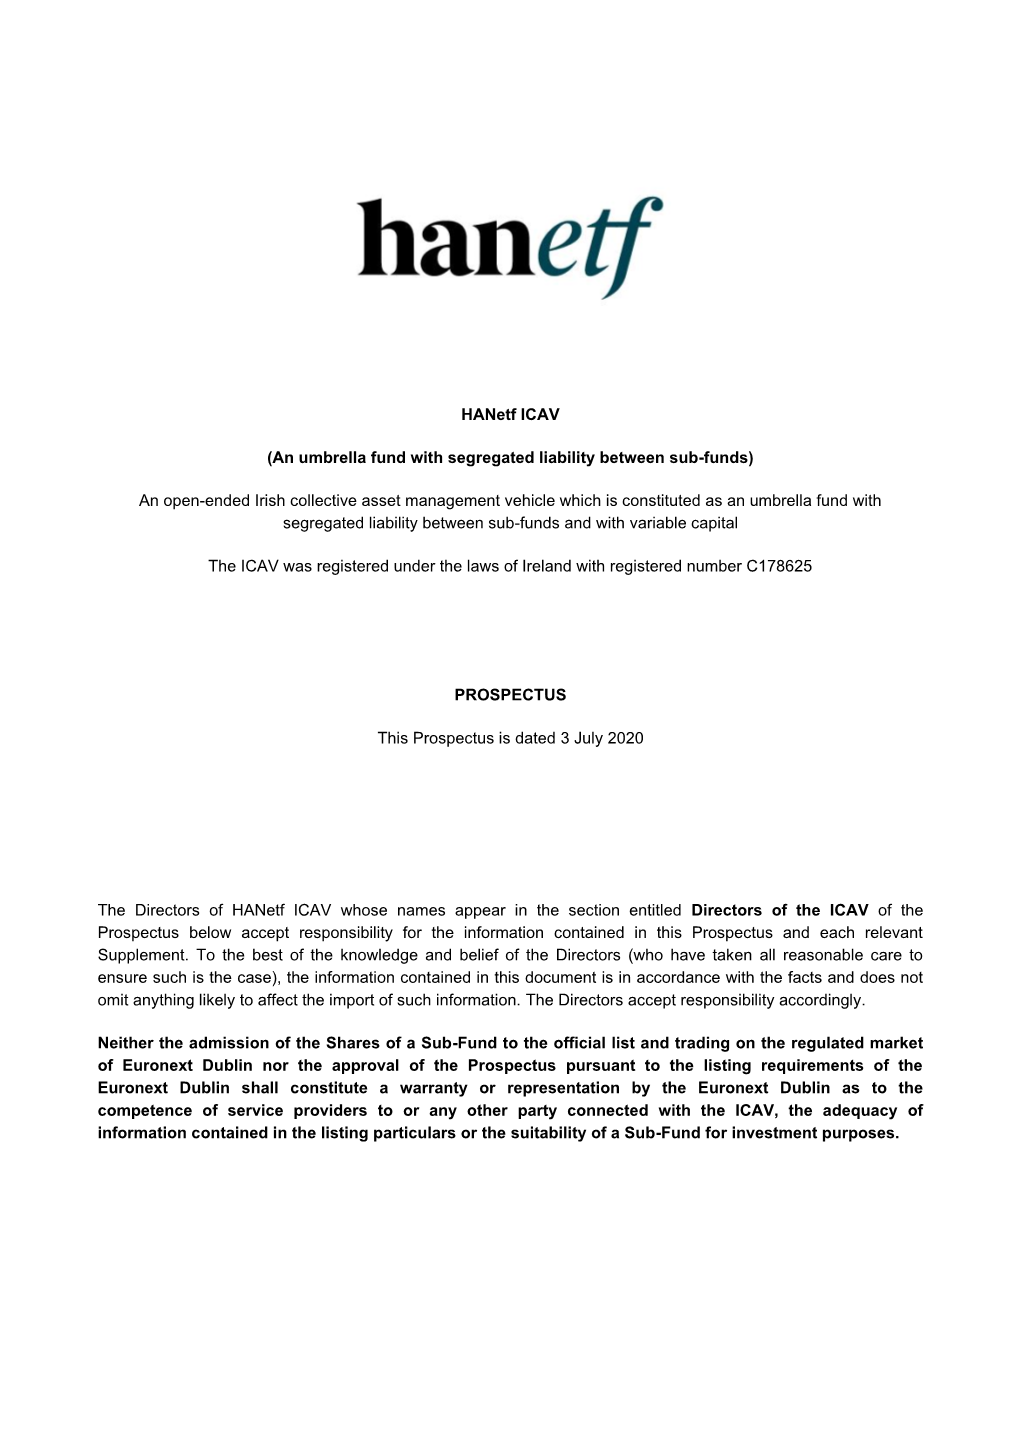 Hanetf ICAV (An Umbrella Fund with Segregated Liability Between Sub